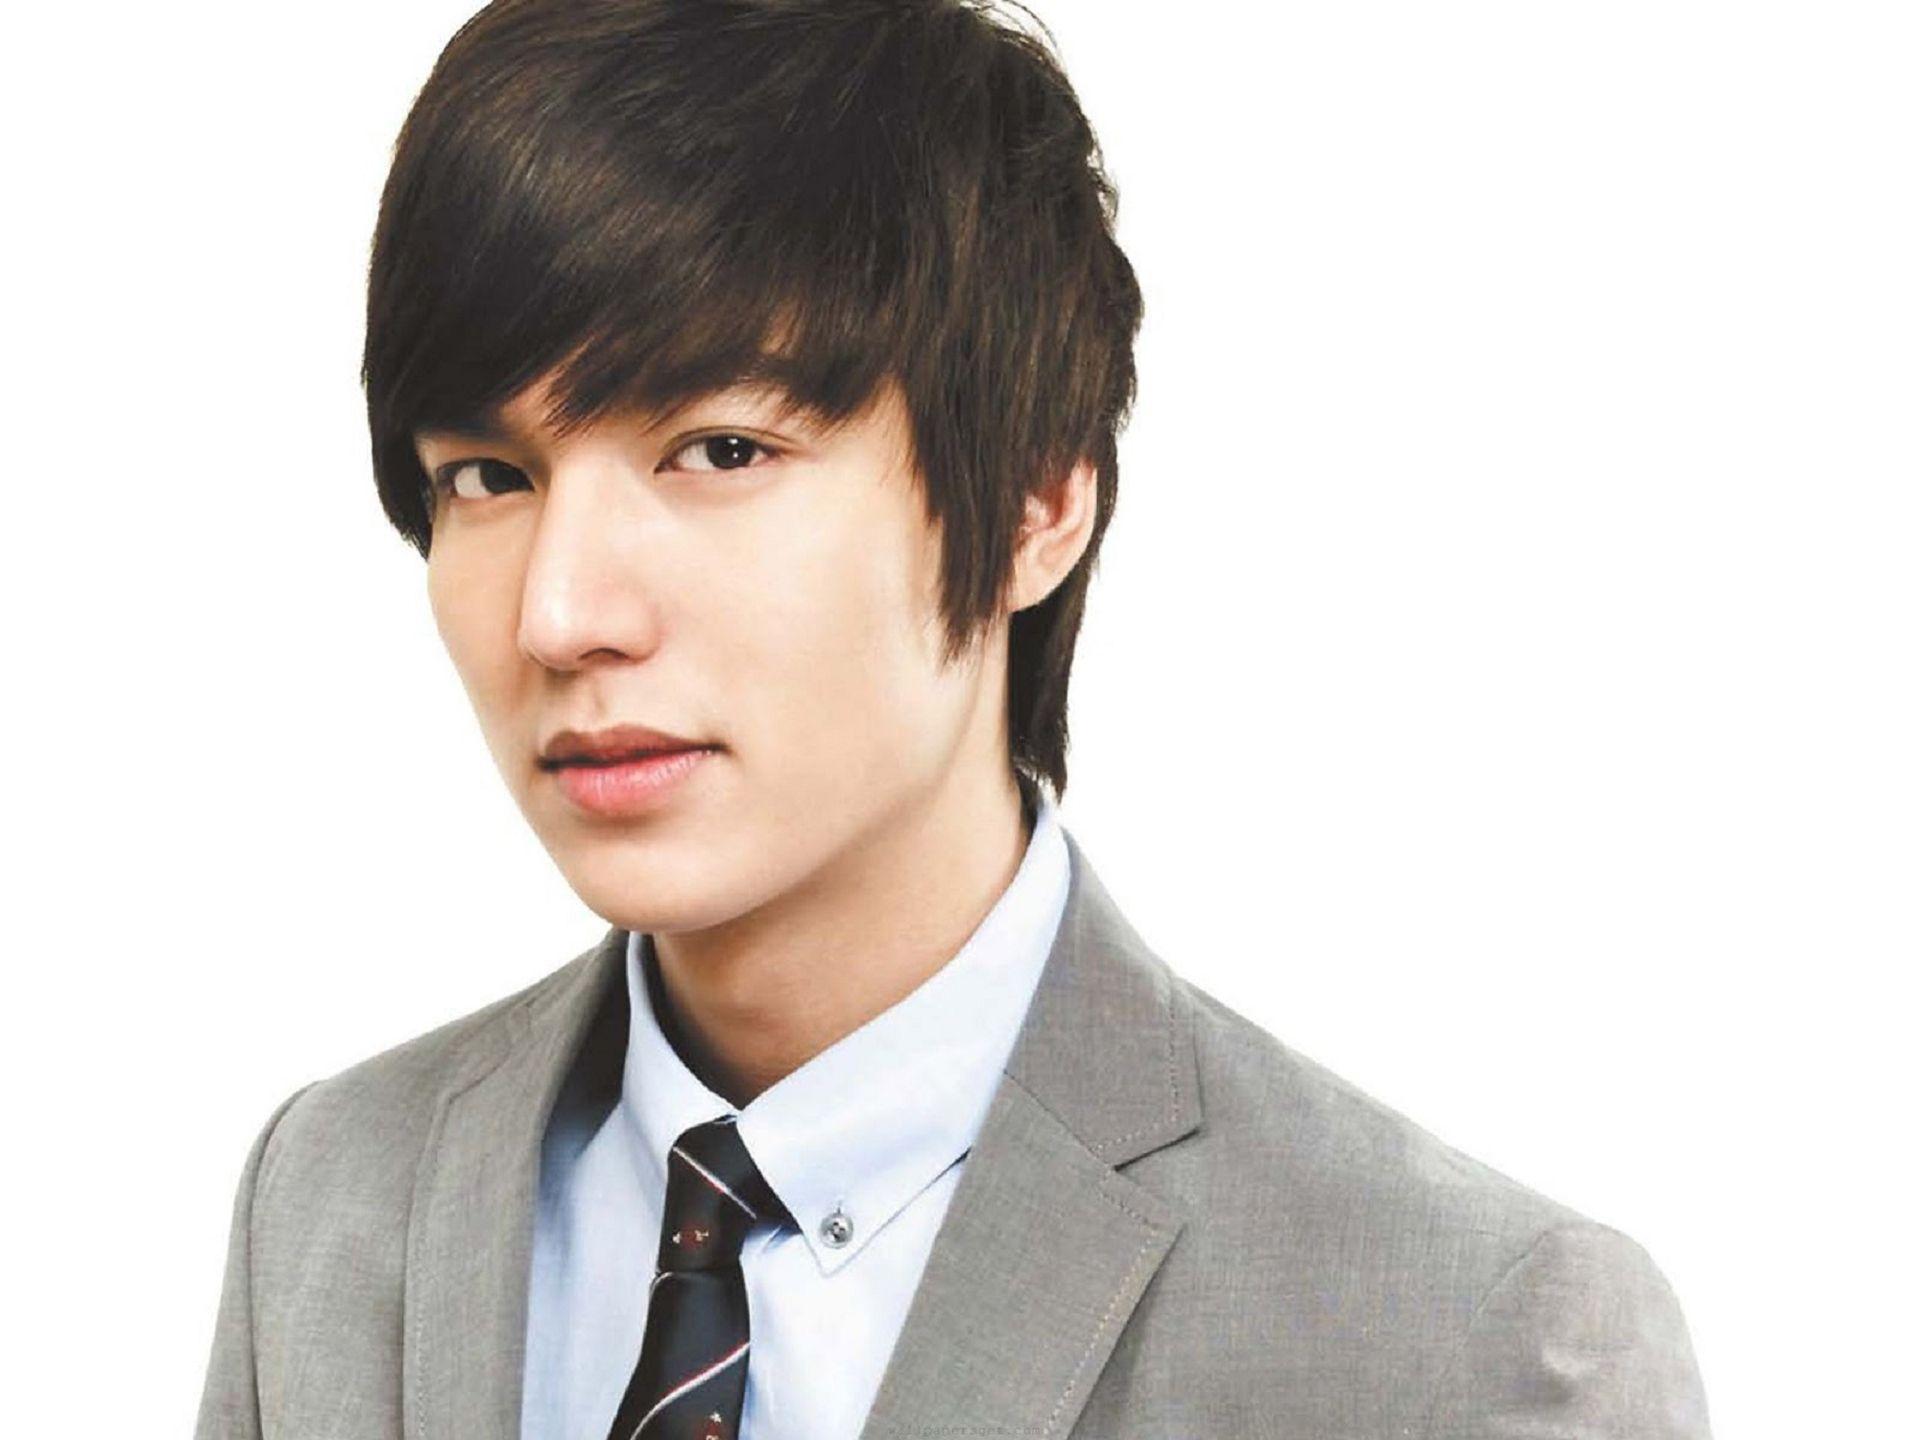 Lee Min Ho Wallpaper Image Photo Picture Background